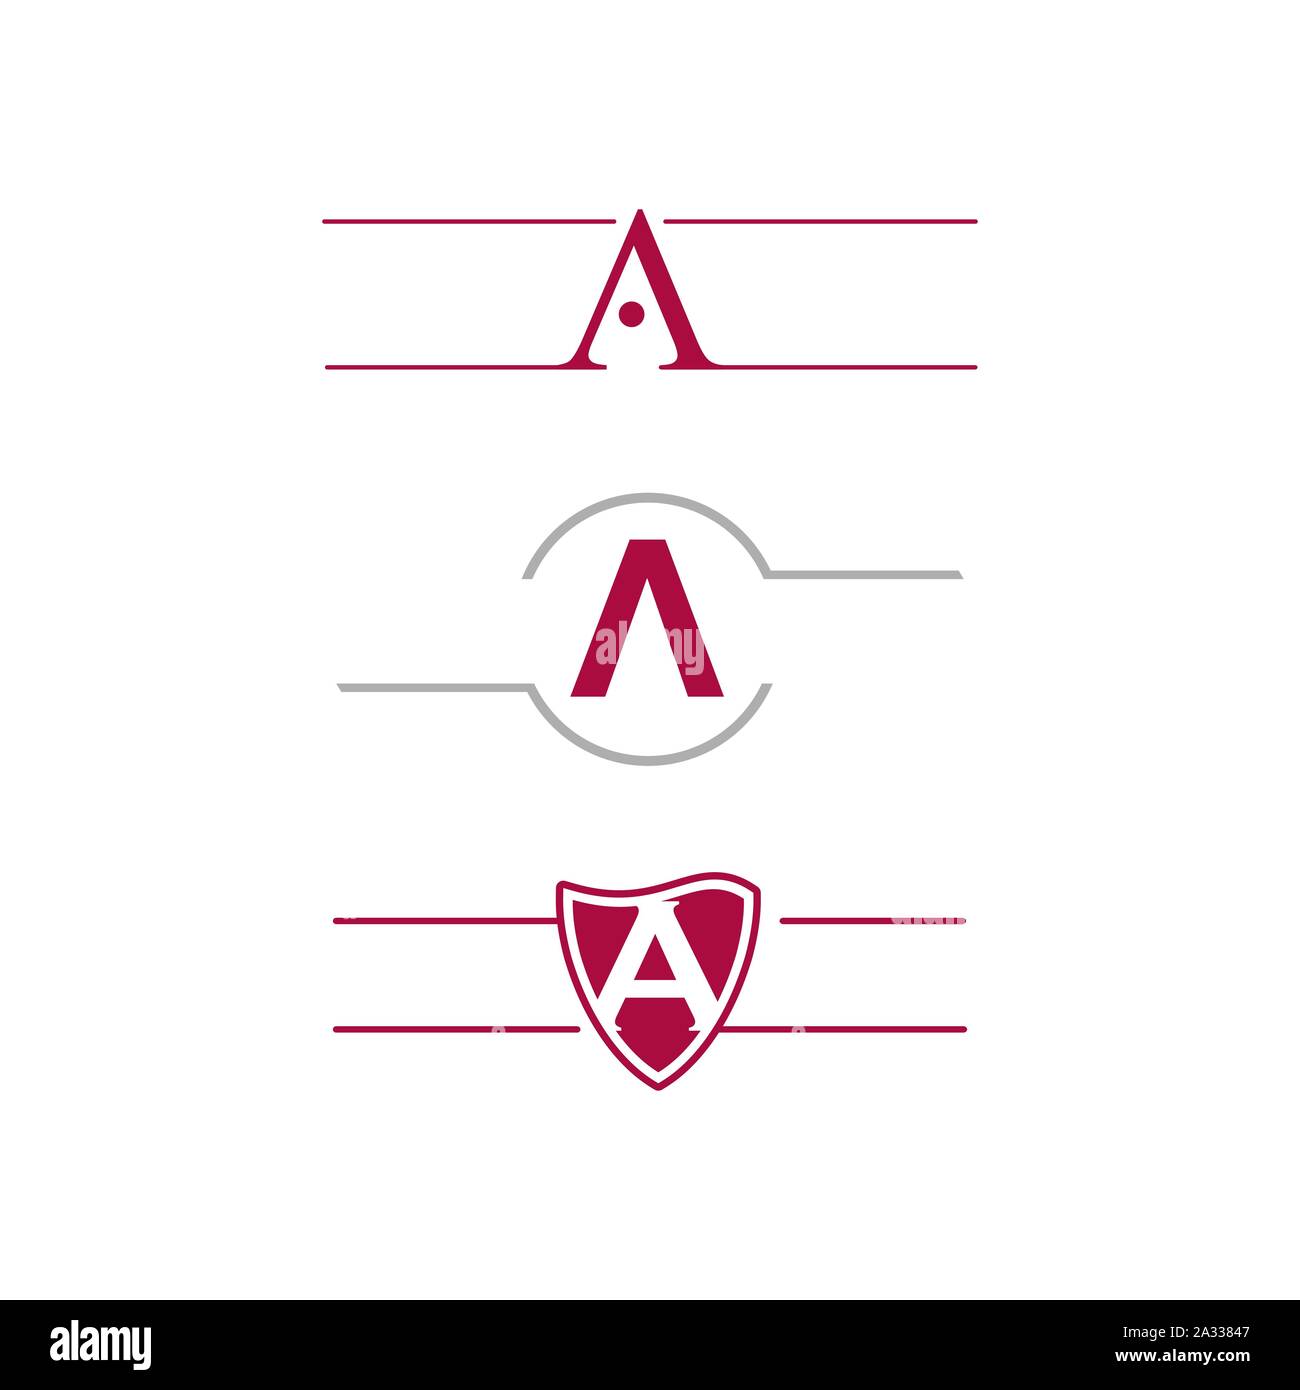 Unusual Triangle Abstract Business Logo Royalty Free Vector